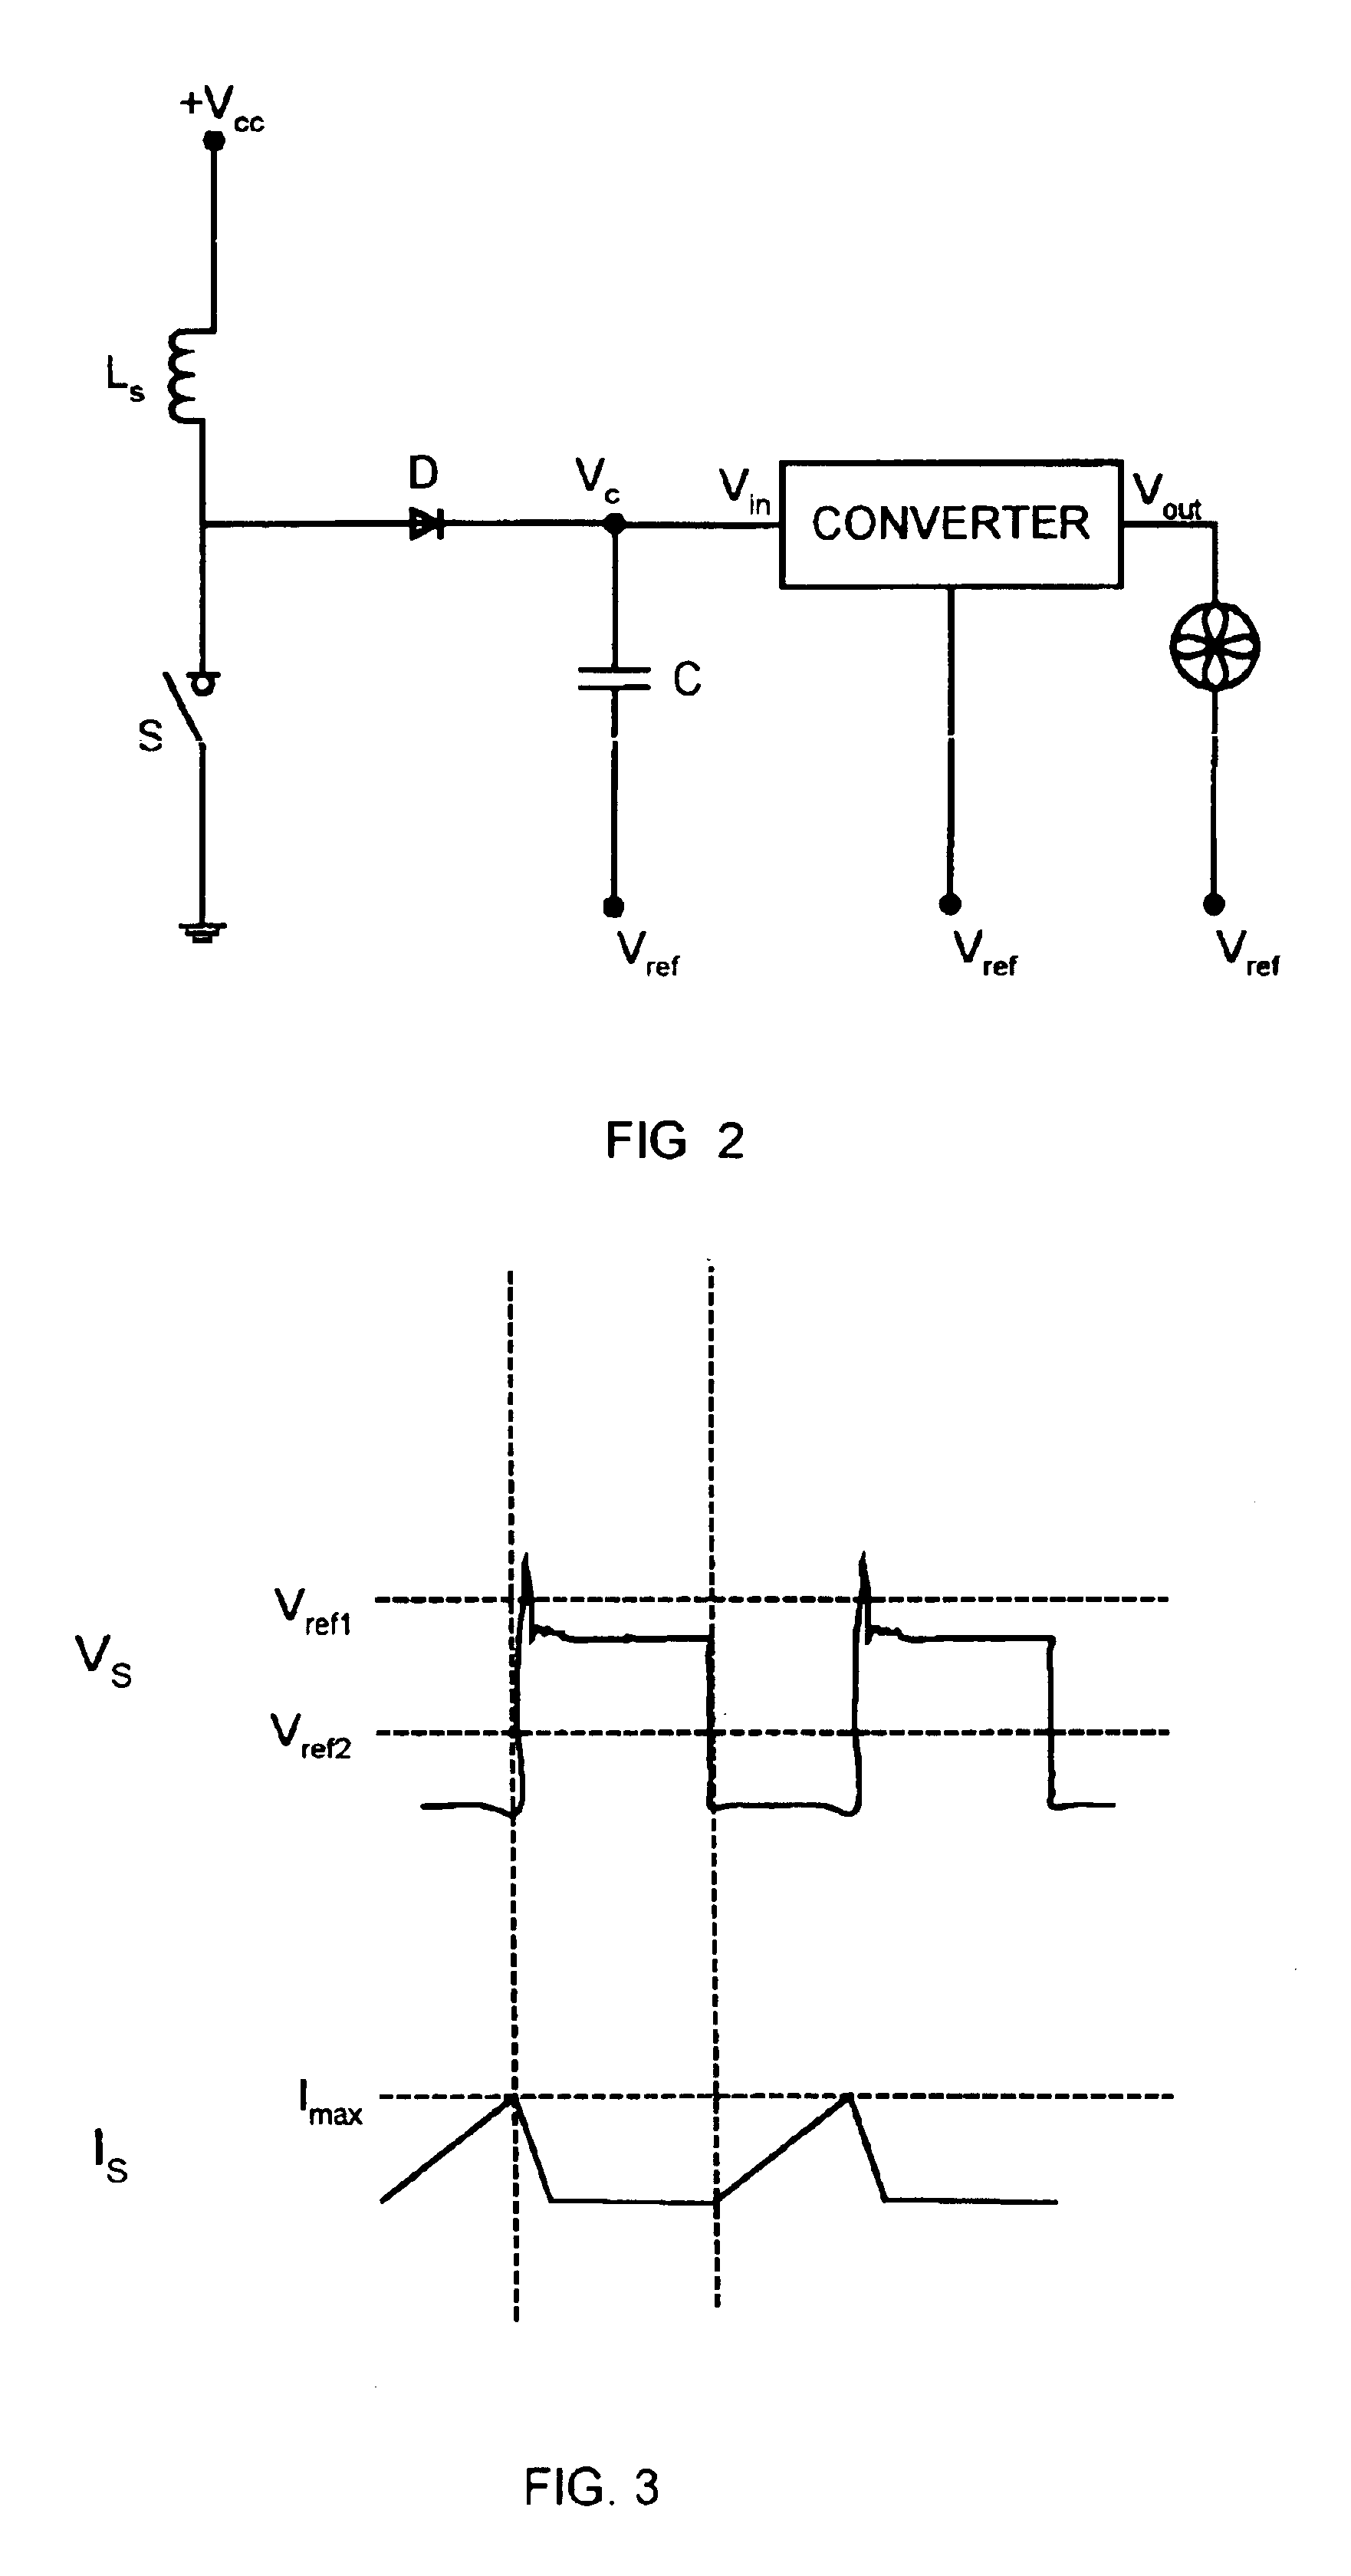 Self-regulated cooling system for switching power supplies using parasitic effects of switching